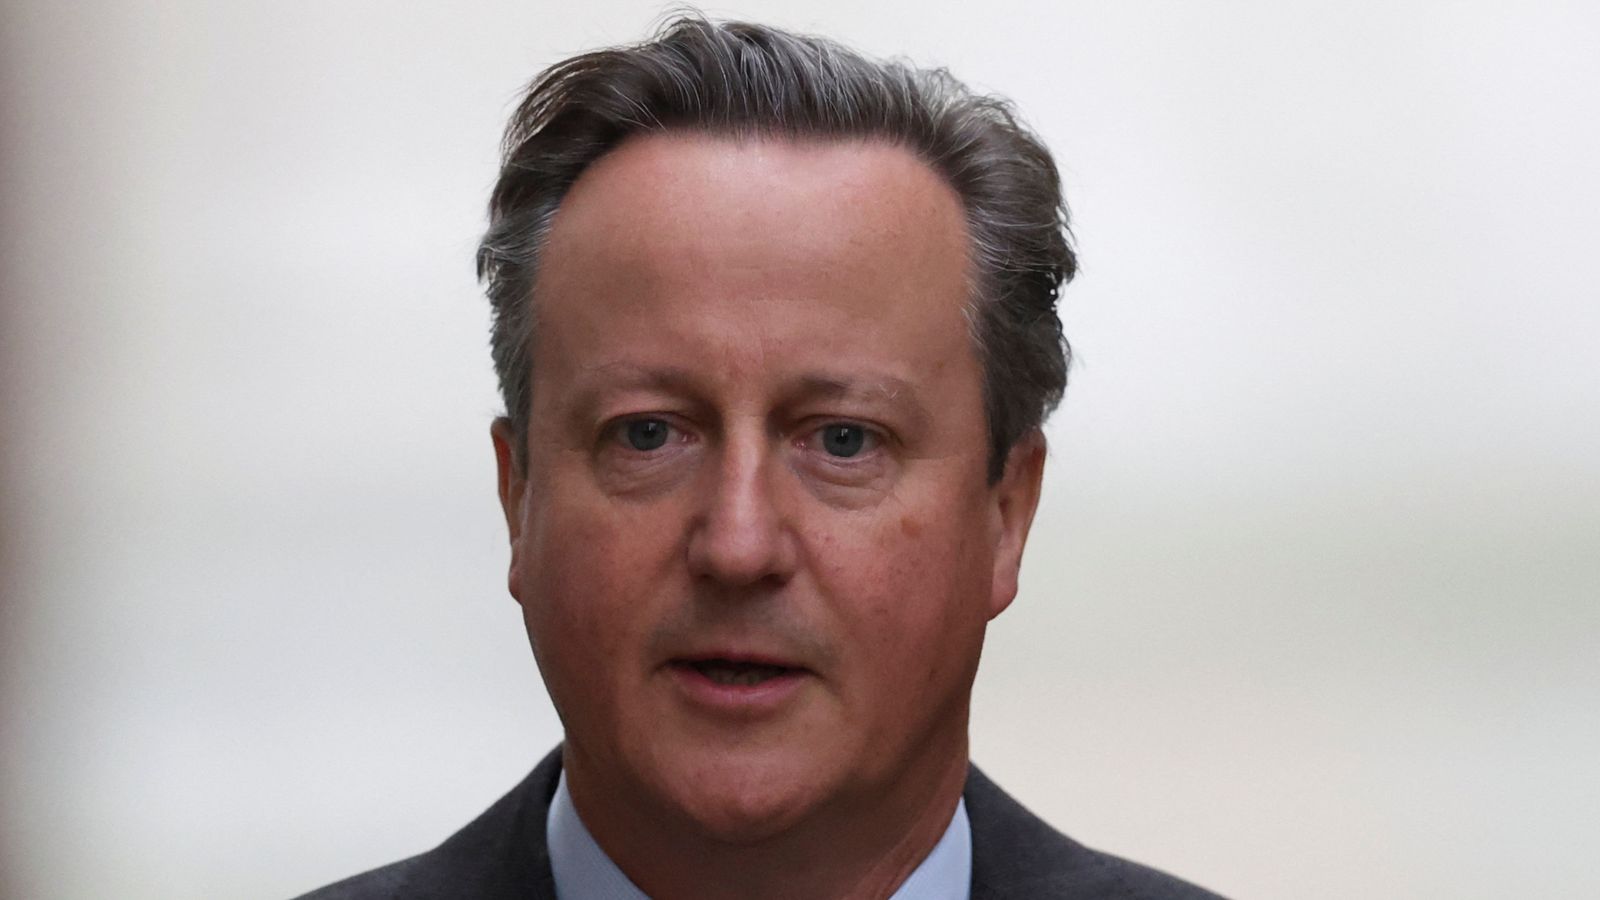 David Cameron to be known as Lord Cameron of Chipping Norton with new peerage